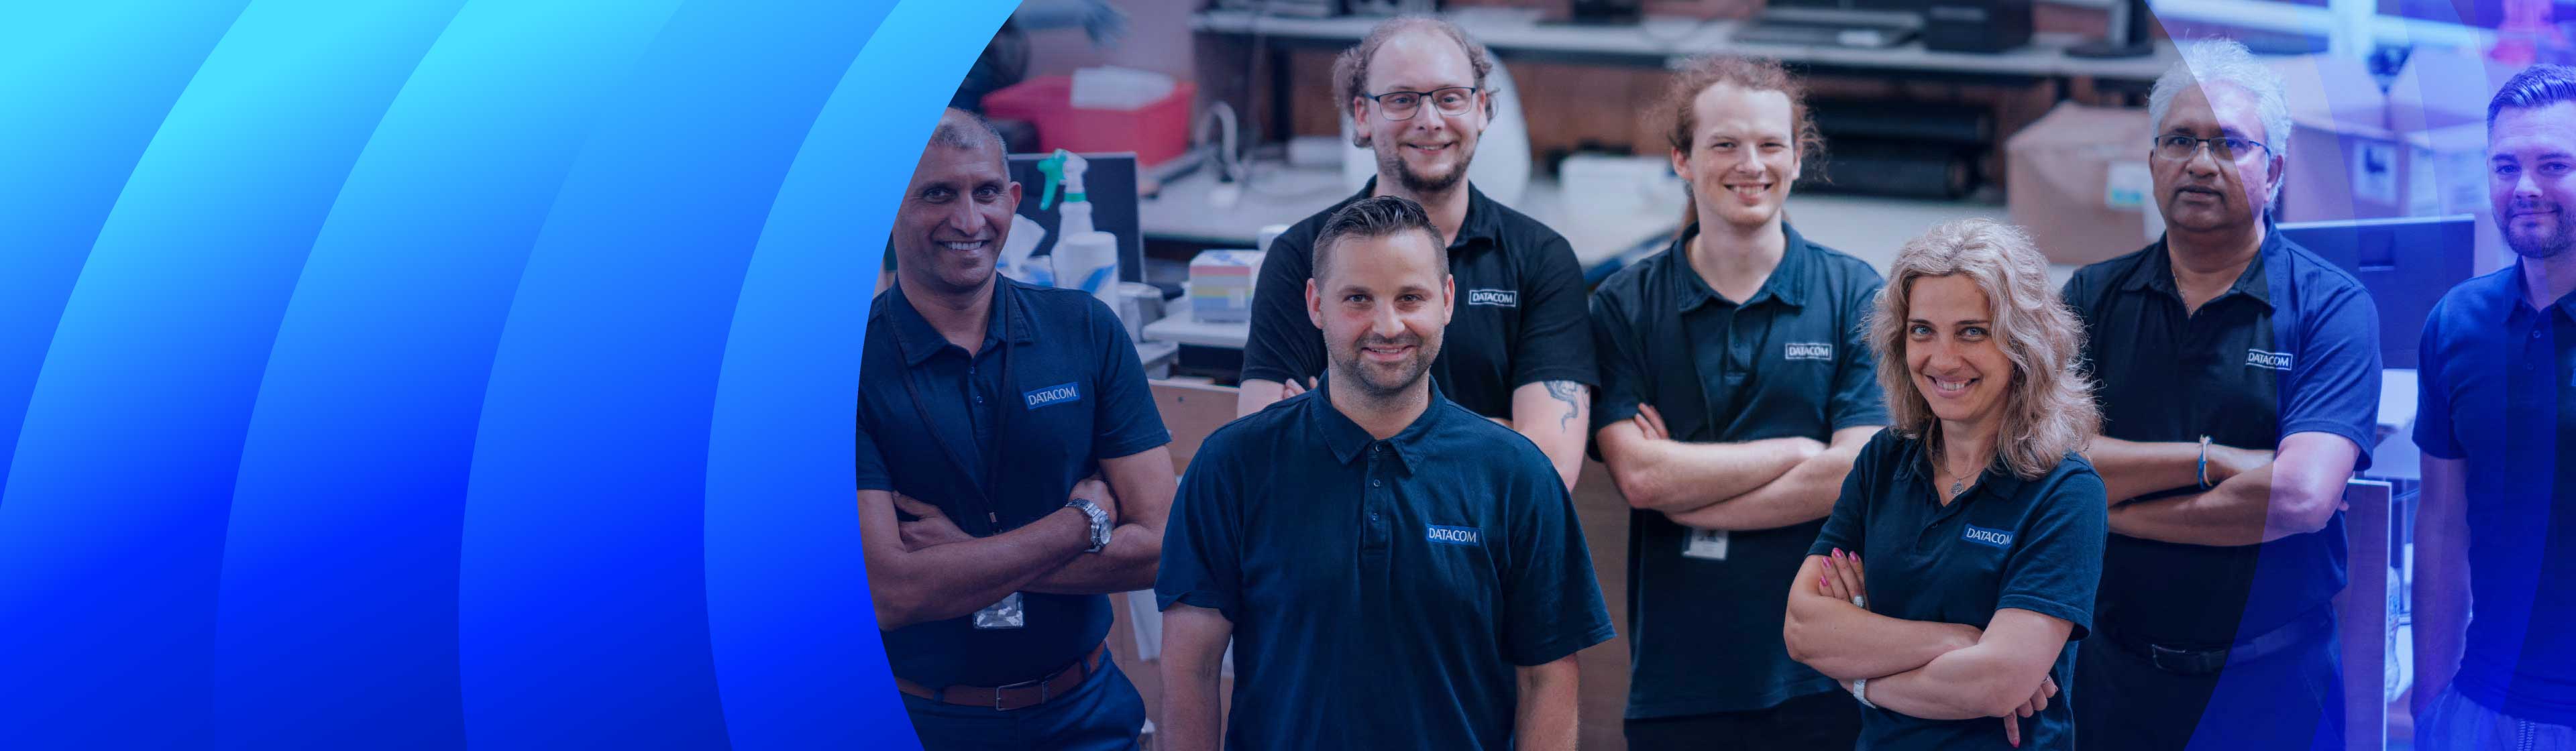 A group of Datacom employees wearing navy blue Datacom branded polo shirts smiling at the camera